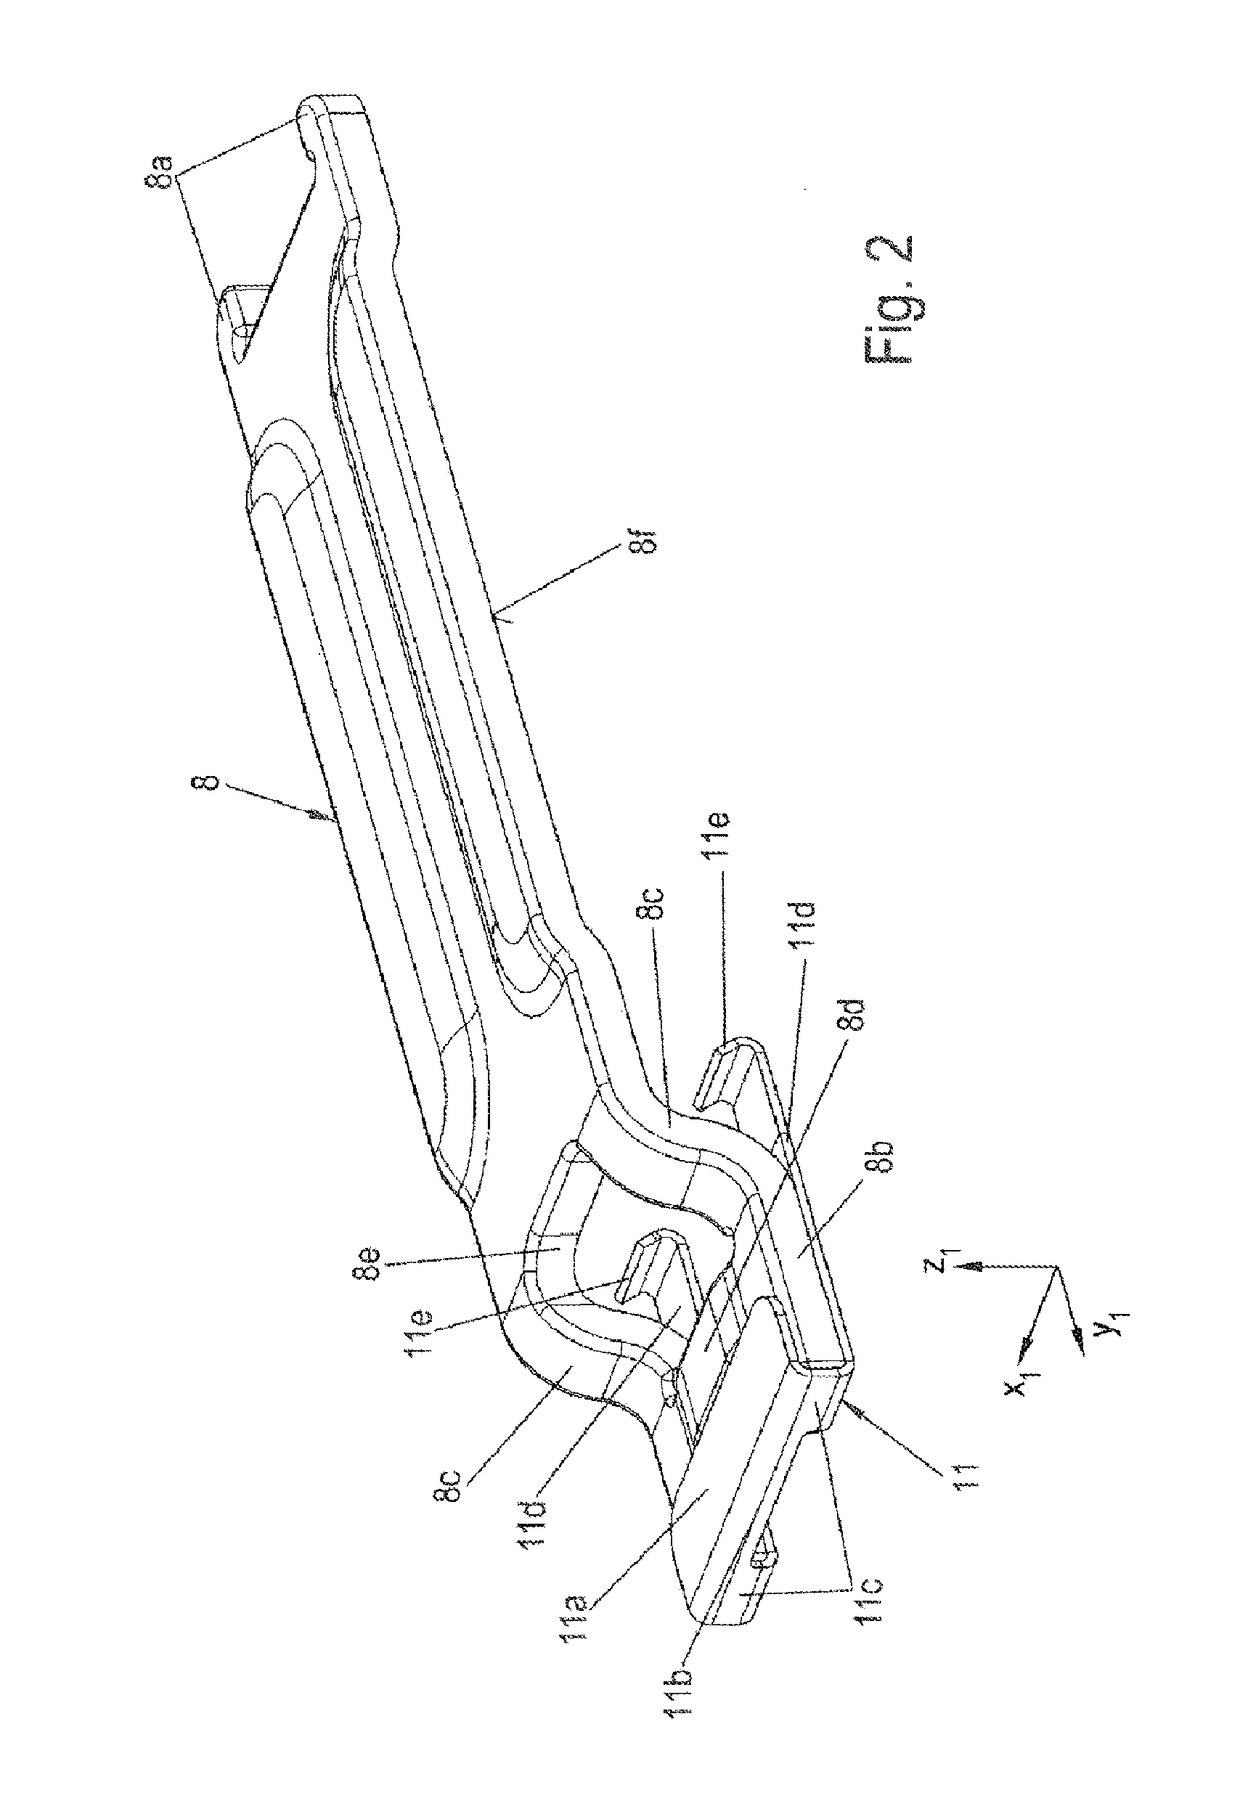 Disk Brake Having a Pad-Retaining Clip and a Securing Device, and Brake Pad Set